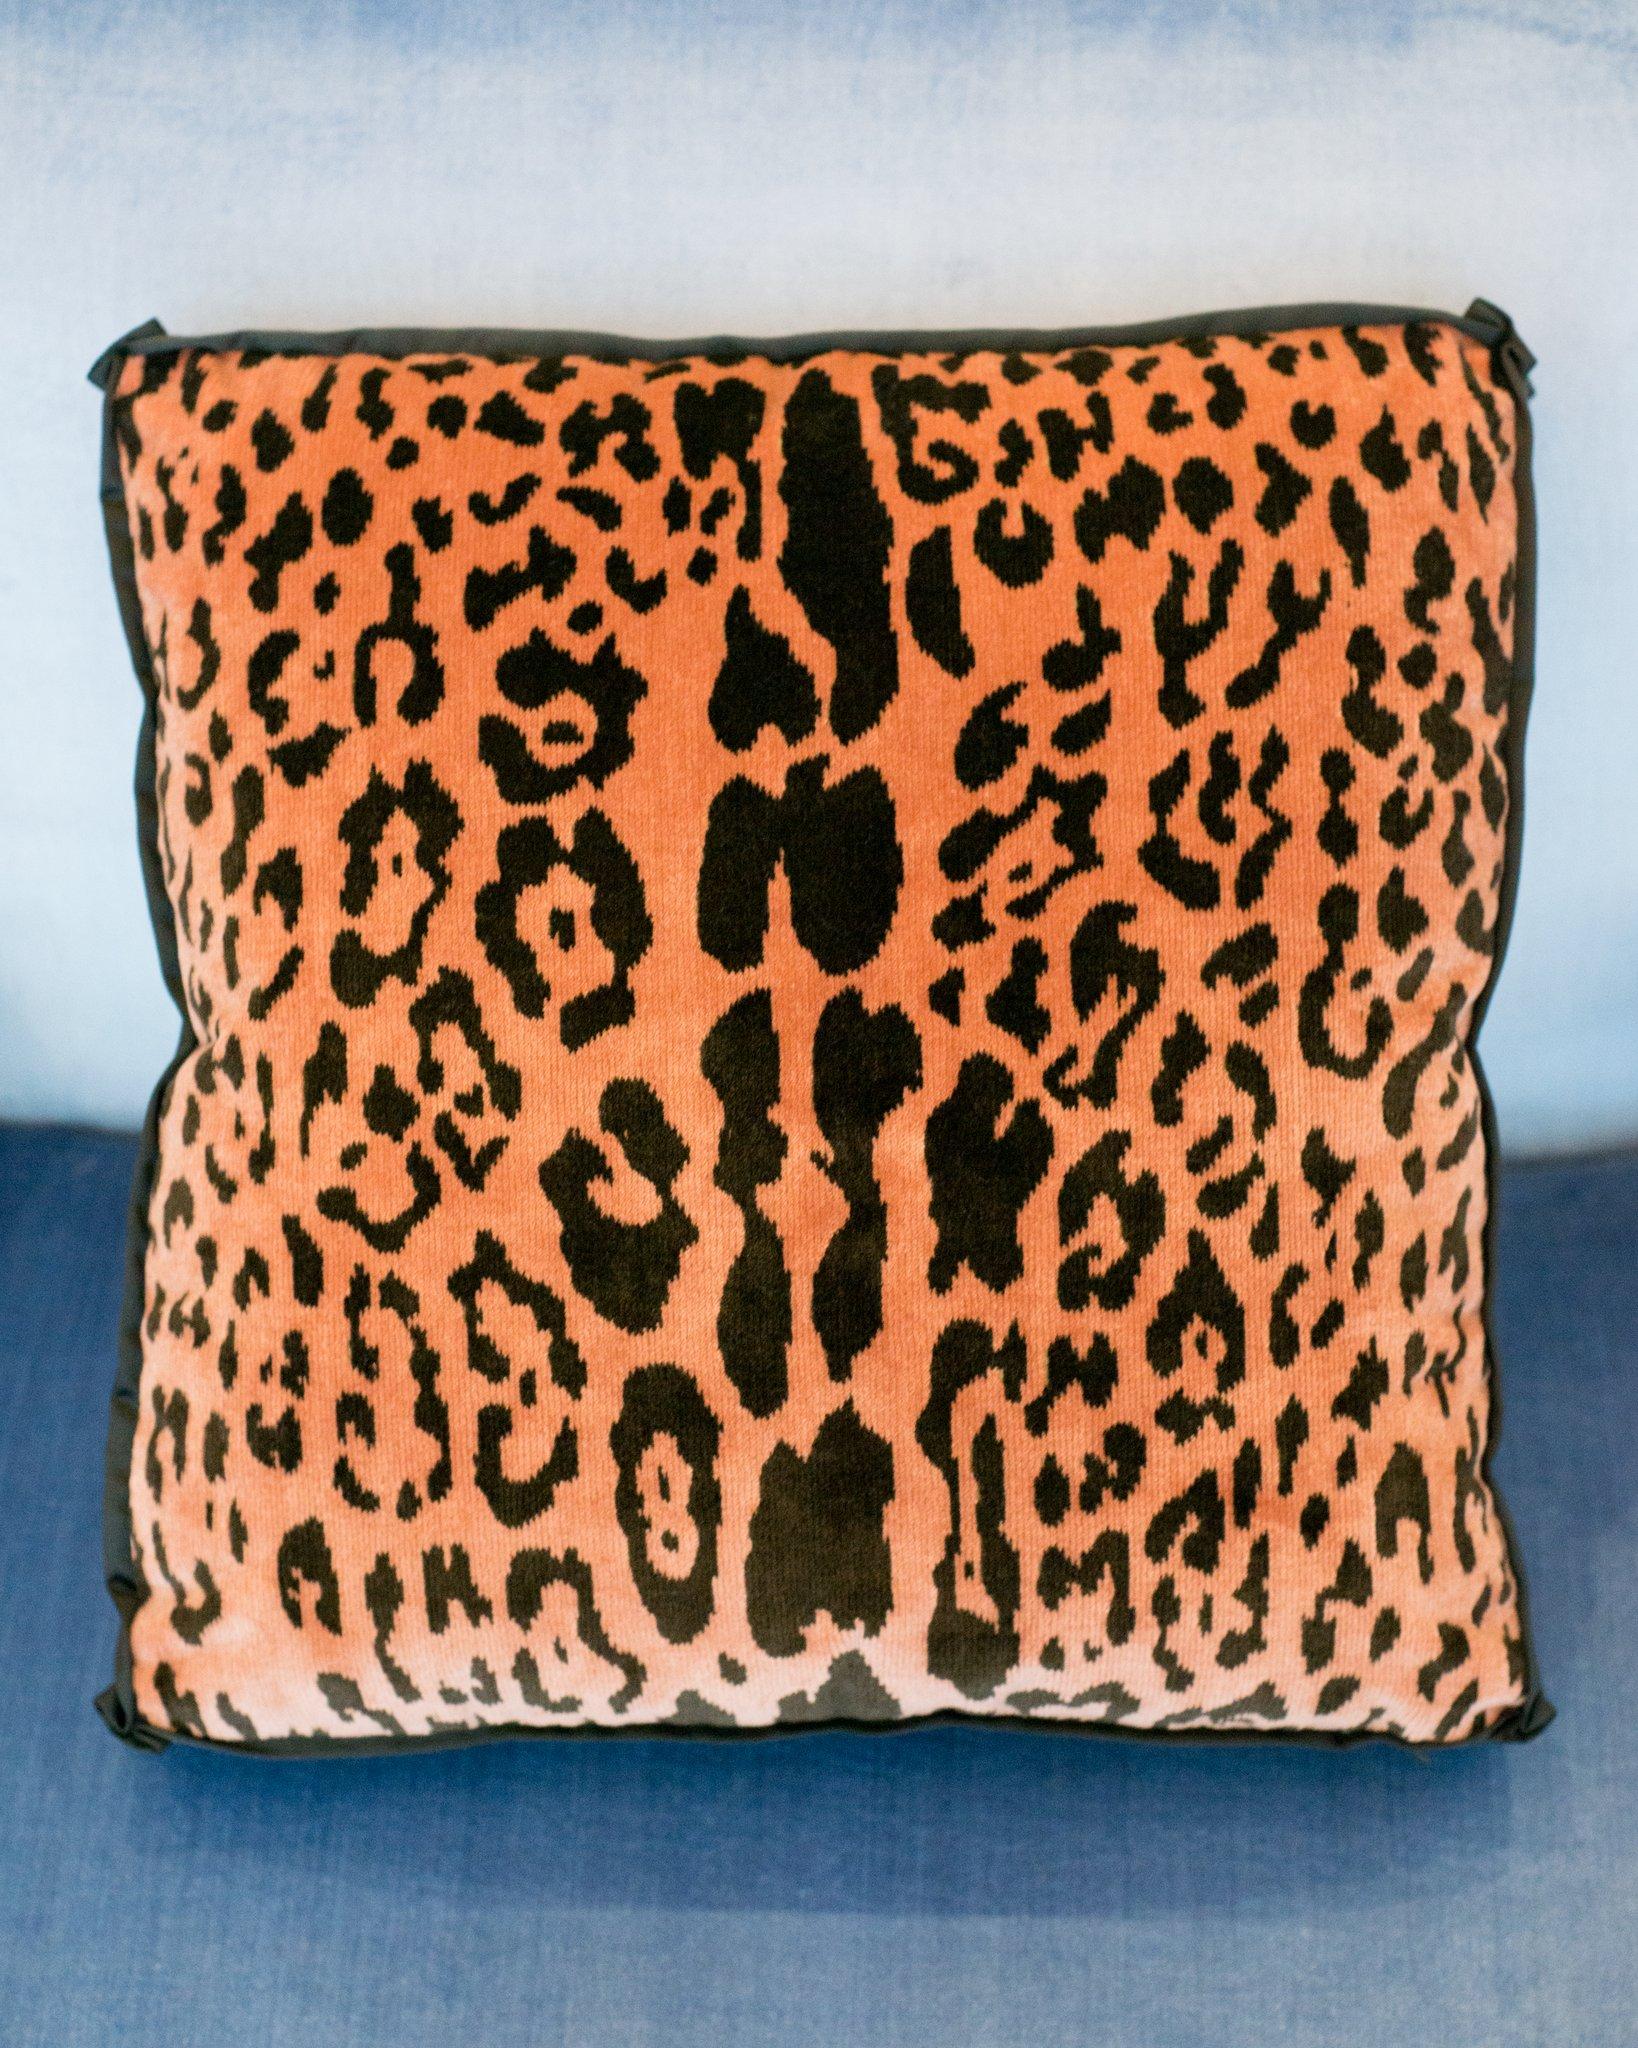 A pair of Studio Maison Nurita pillows in our signature box design with Bevilacqua coral leopard print velvet with a satin border and pleated corners. Established by Luigi Bevilacqua, and operating out of Venice since 1875, Bevilacqua Tessuti